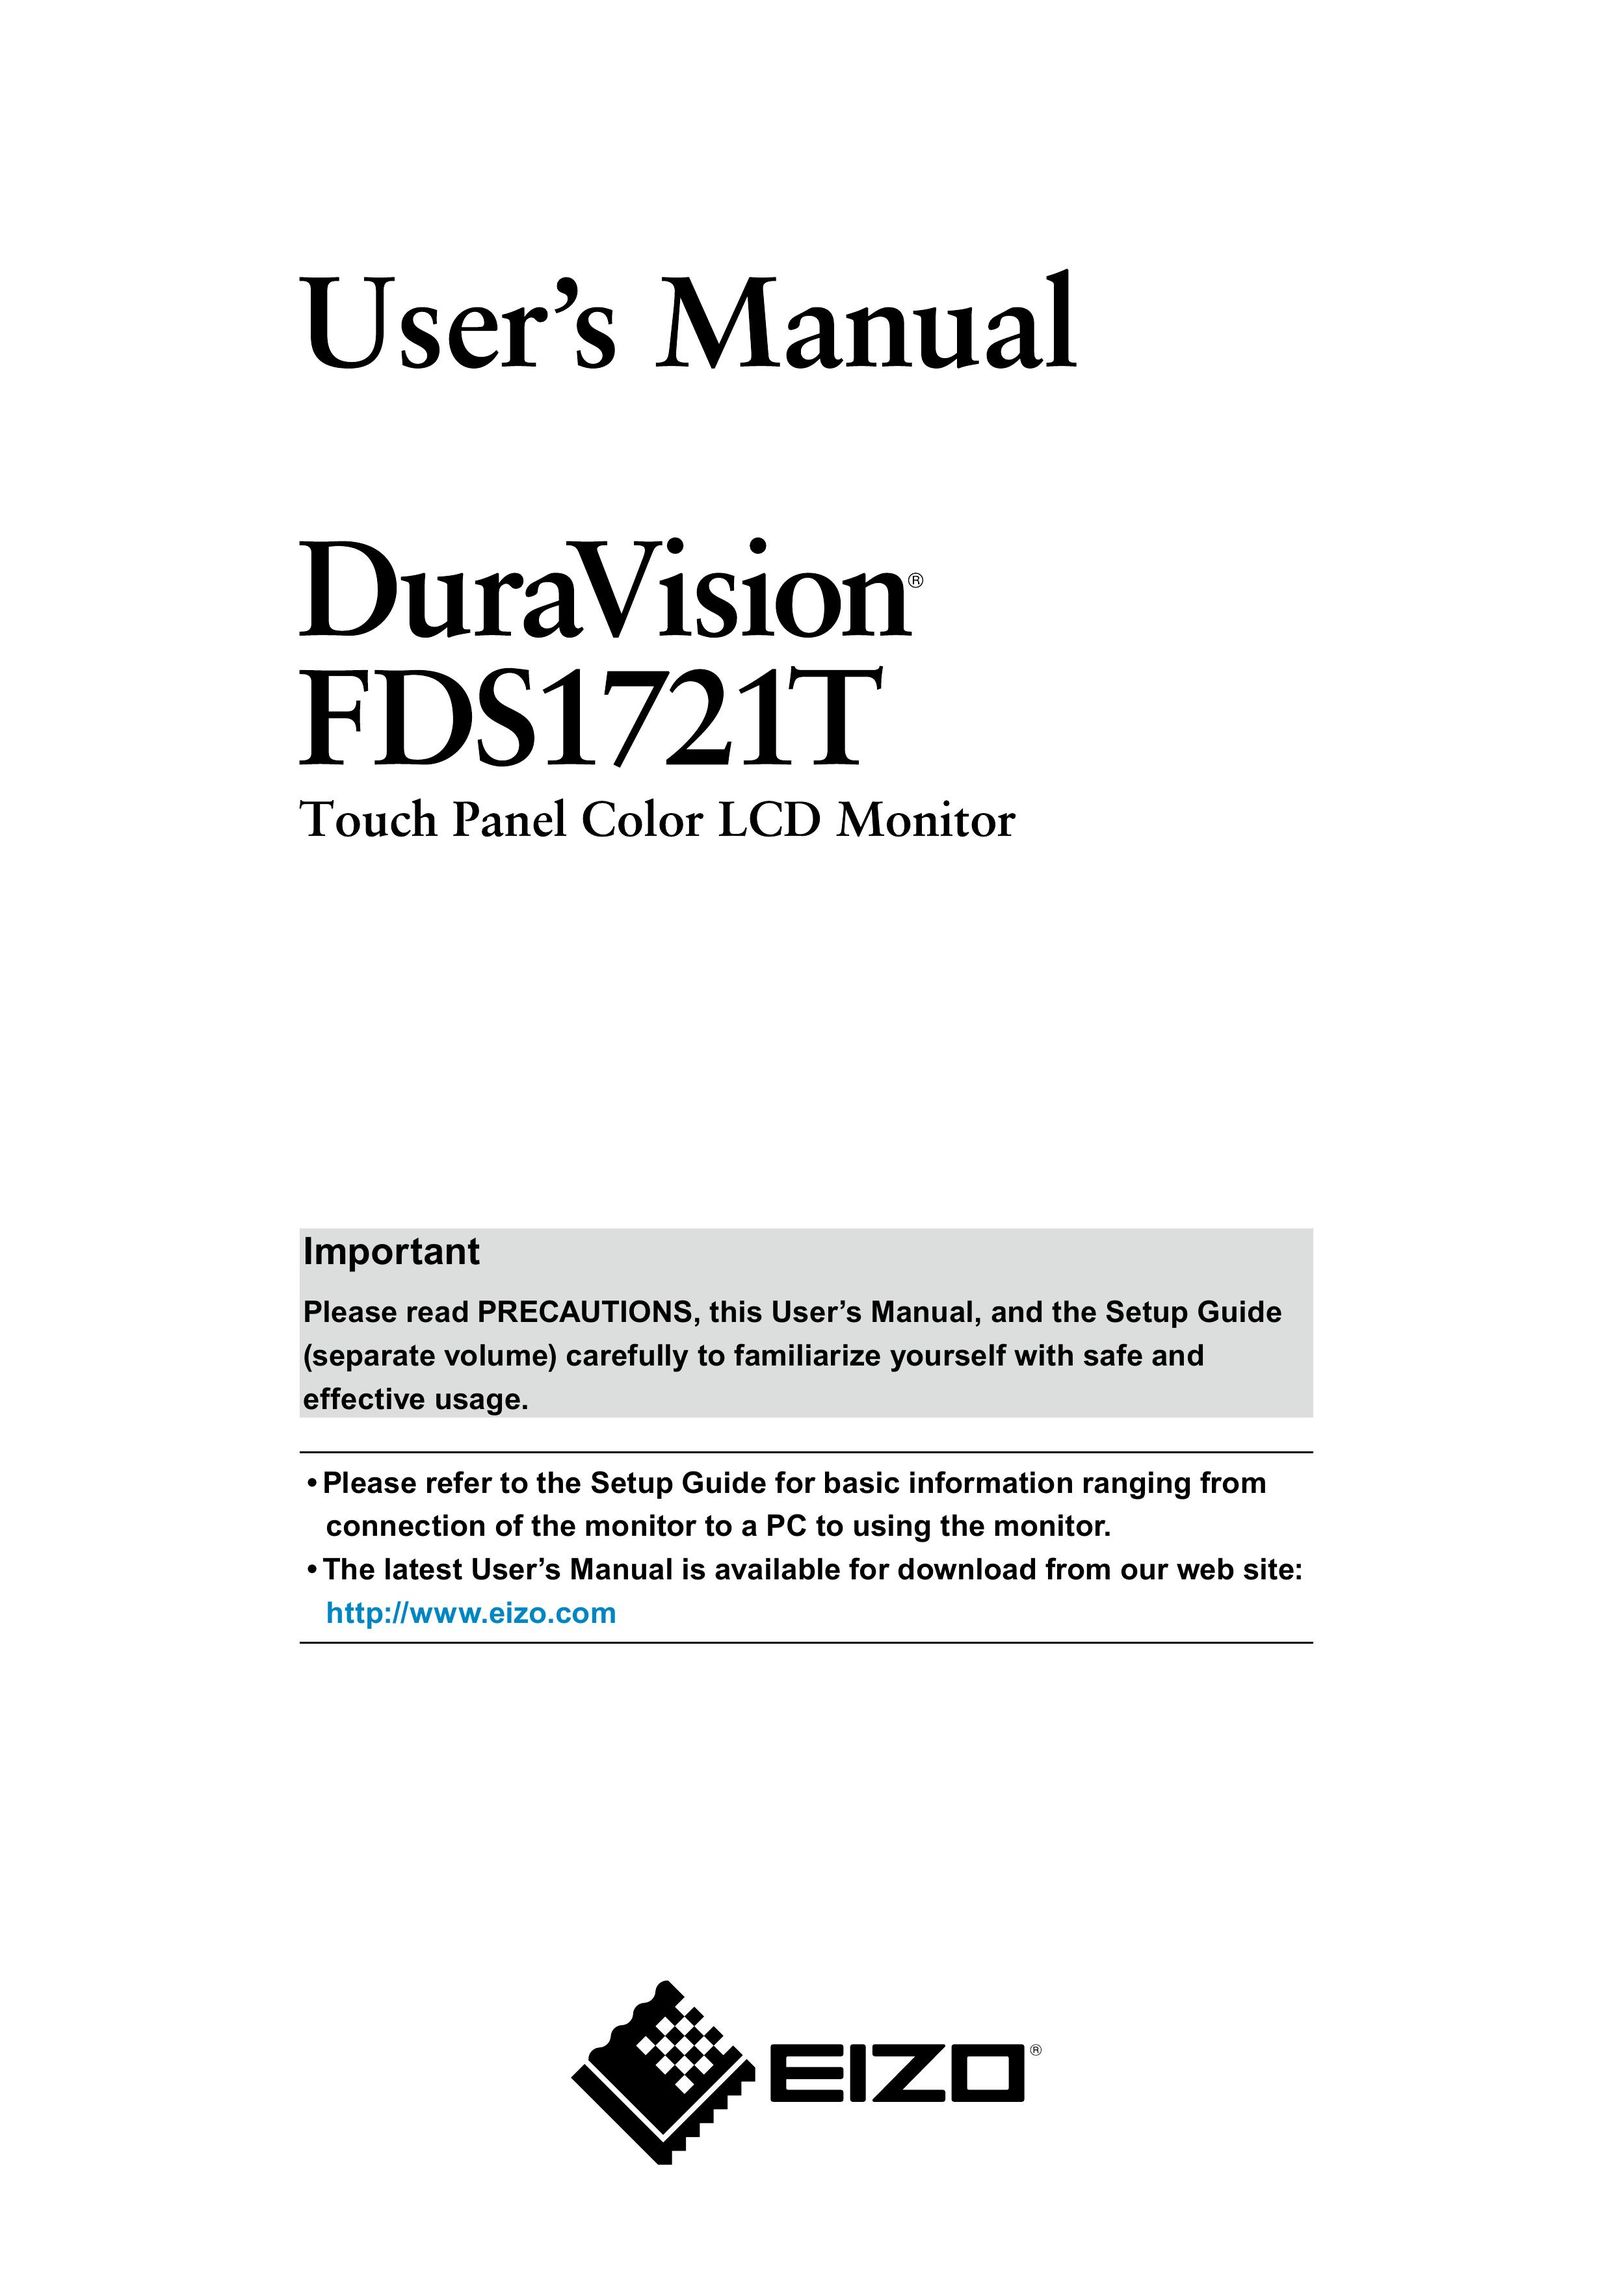 Eizo FDS1721T Car Video System User Manual